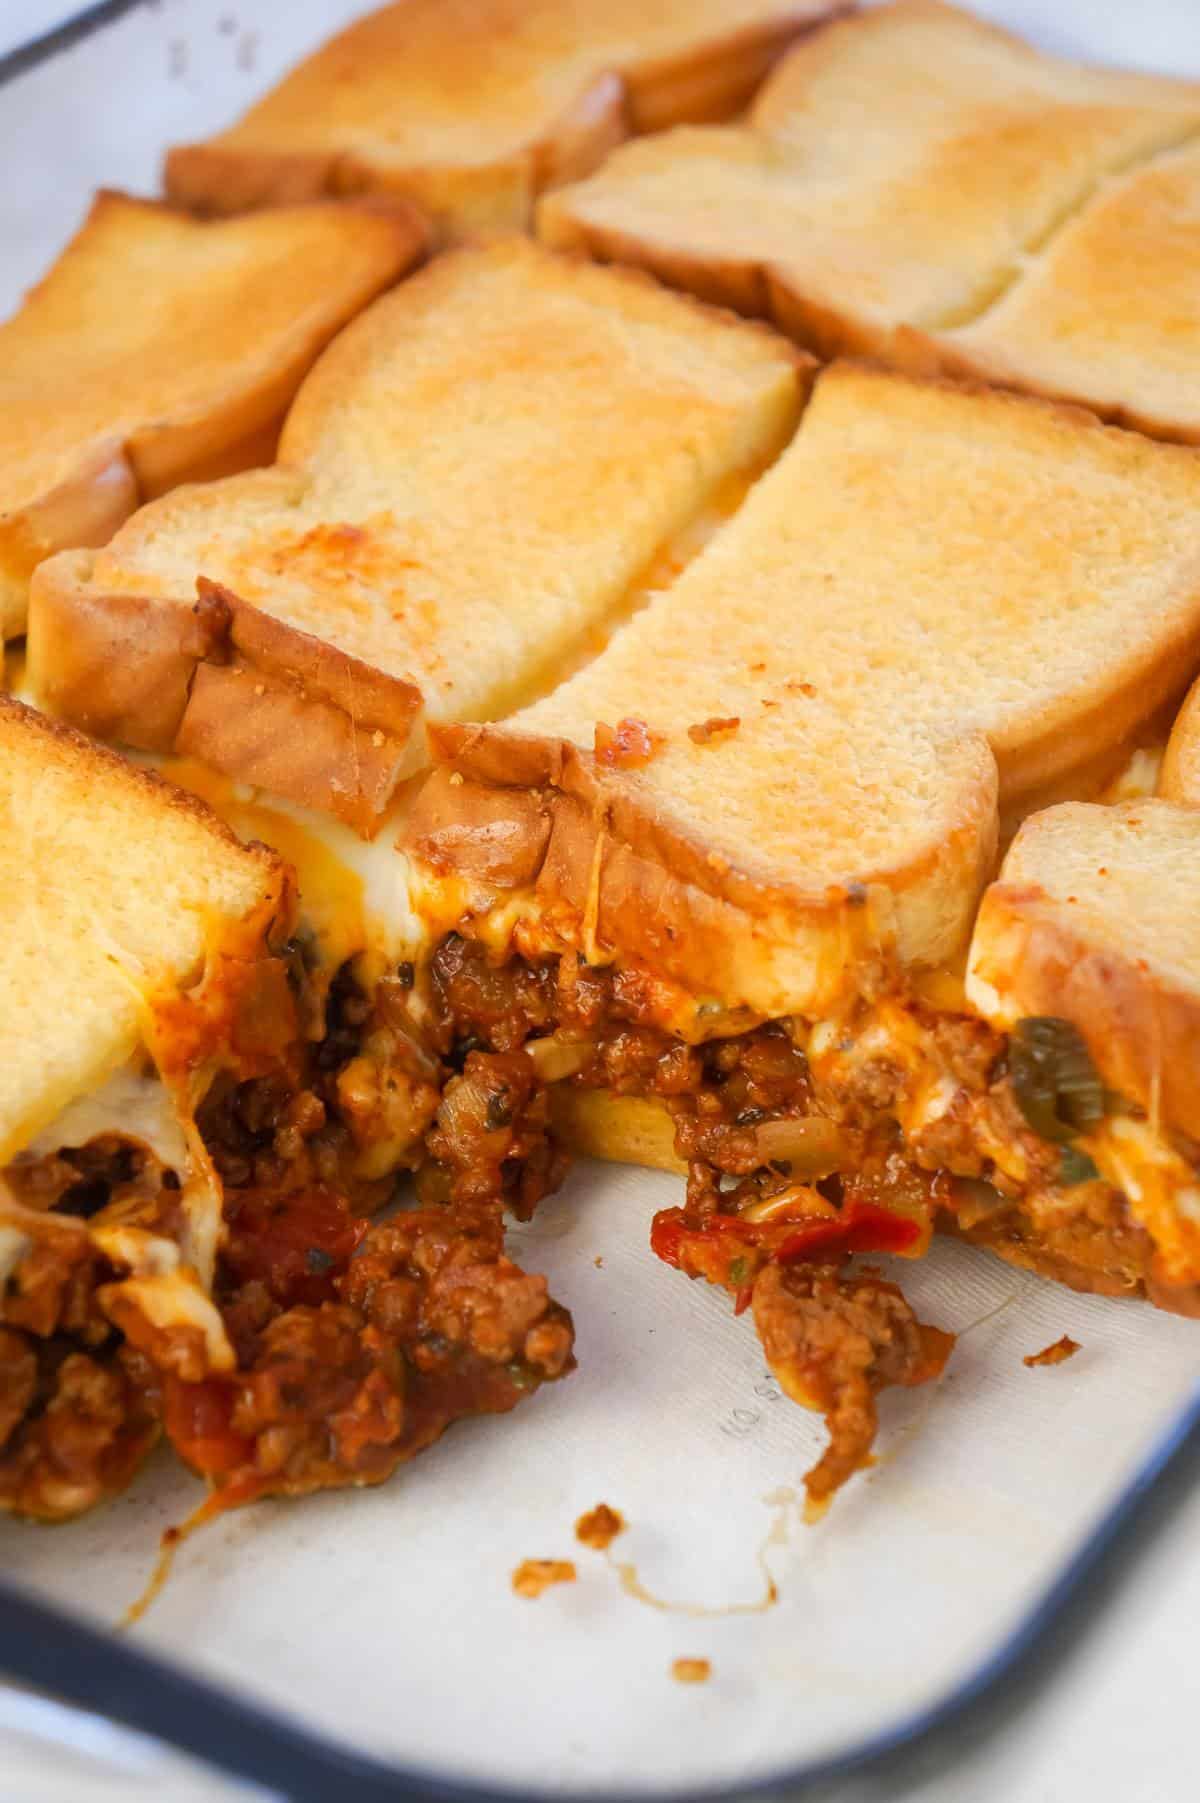 Beef Taco Grilled Cheese Casserole is an easy casserole recipe with layers of toasted bread, cheese and ground beef tossed in salsa, chili sauce and taco seasoning.